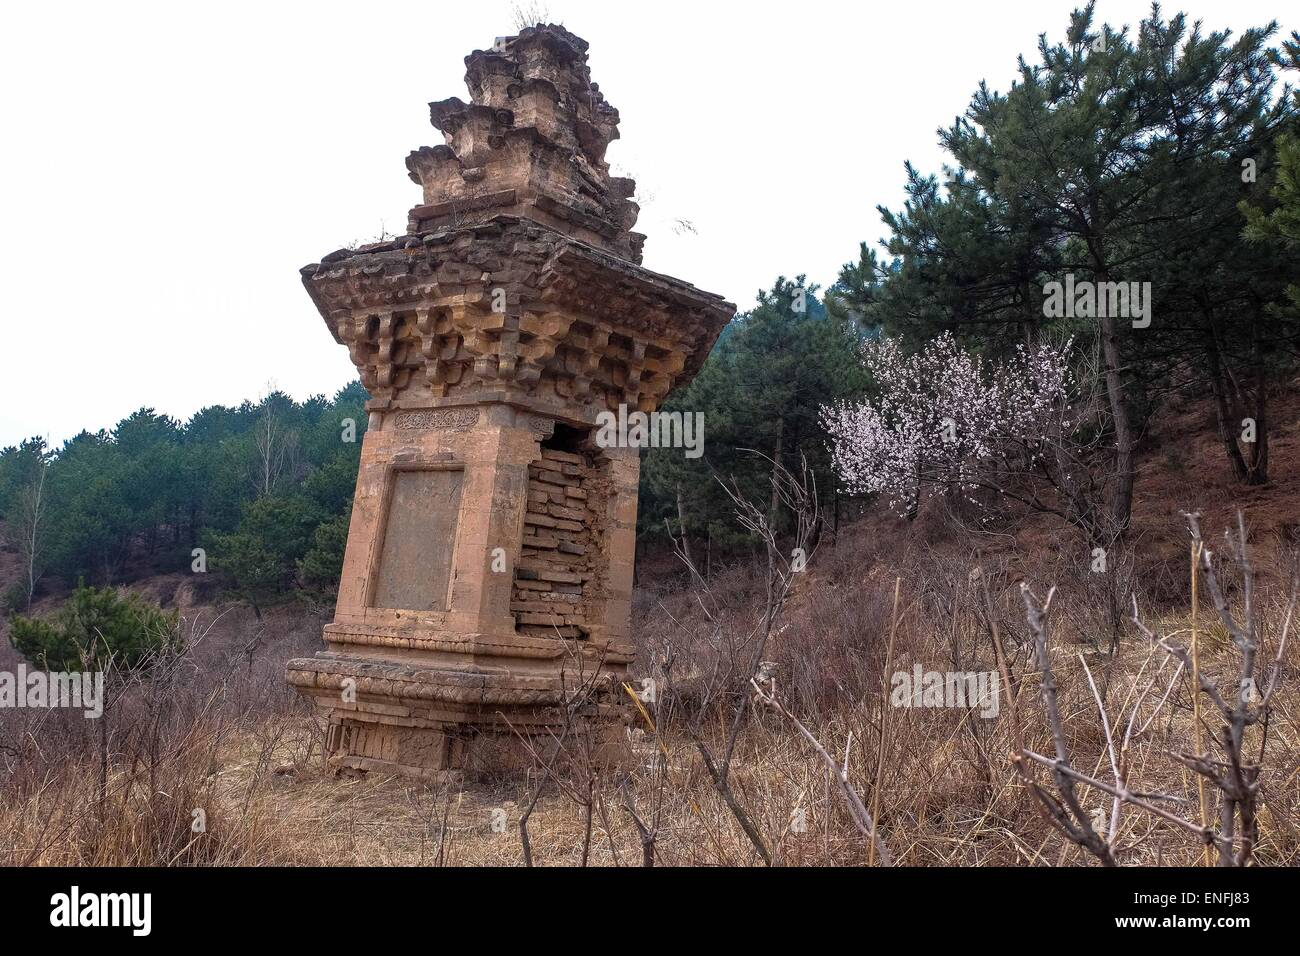 Taiyuan. 8th Apr, 2015. Photo taken on April 8, 2015 shows an ancient brick tower at the Foguang Temple, nestled in Mount Wutai, a sacred Buddhist mountain in north China's Shanxi Province. The East Main Hall of the Foguang Temple, a structure built in 857 during the Tang Dynasty (618-917), is one of the oldest wooden buildings in China. © Fan Minda/Xinhua/Alamy Live News Stock Photo